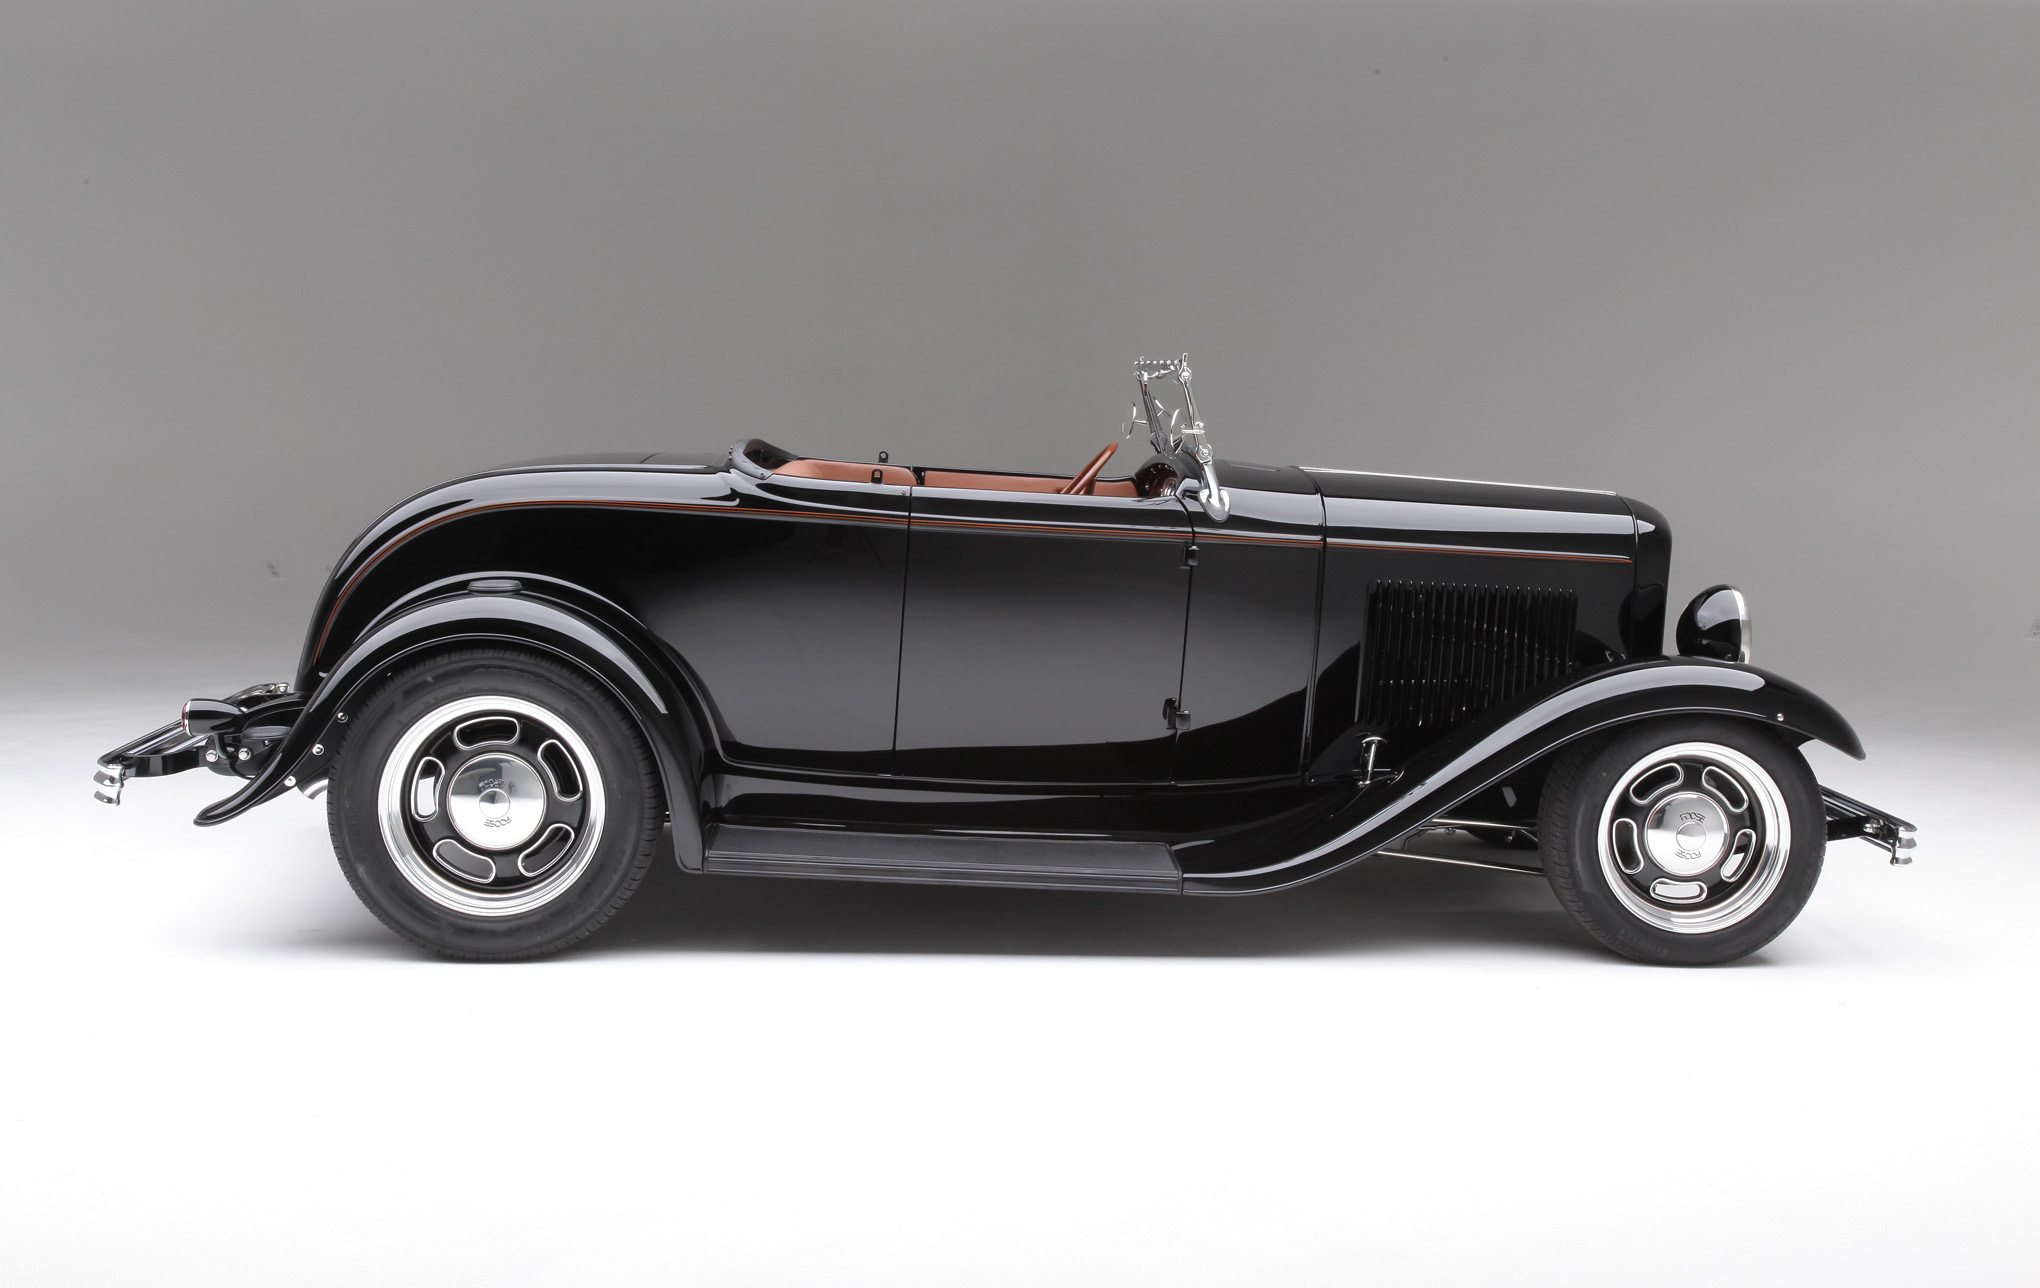 Ford Deuce Roadster  Free Stock Photos